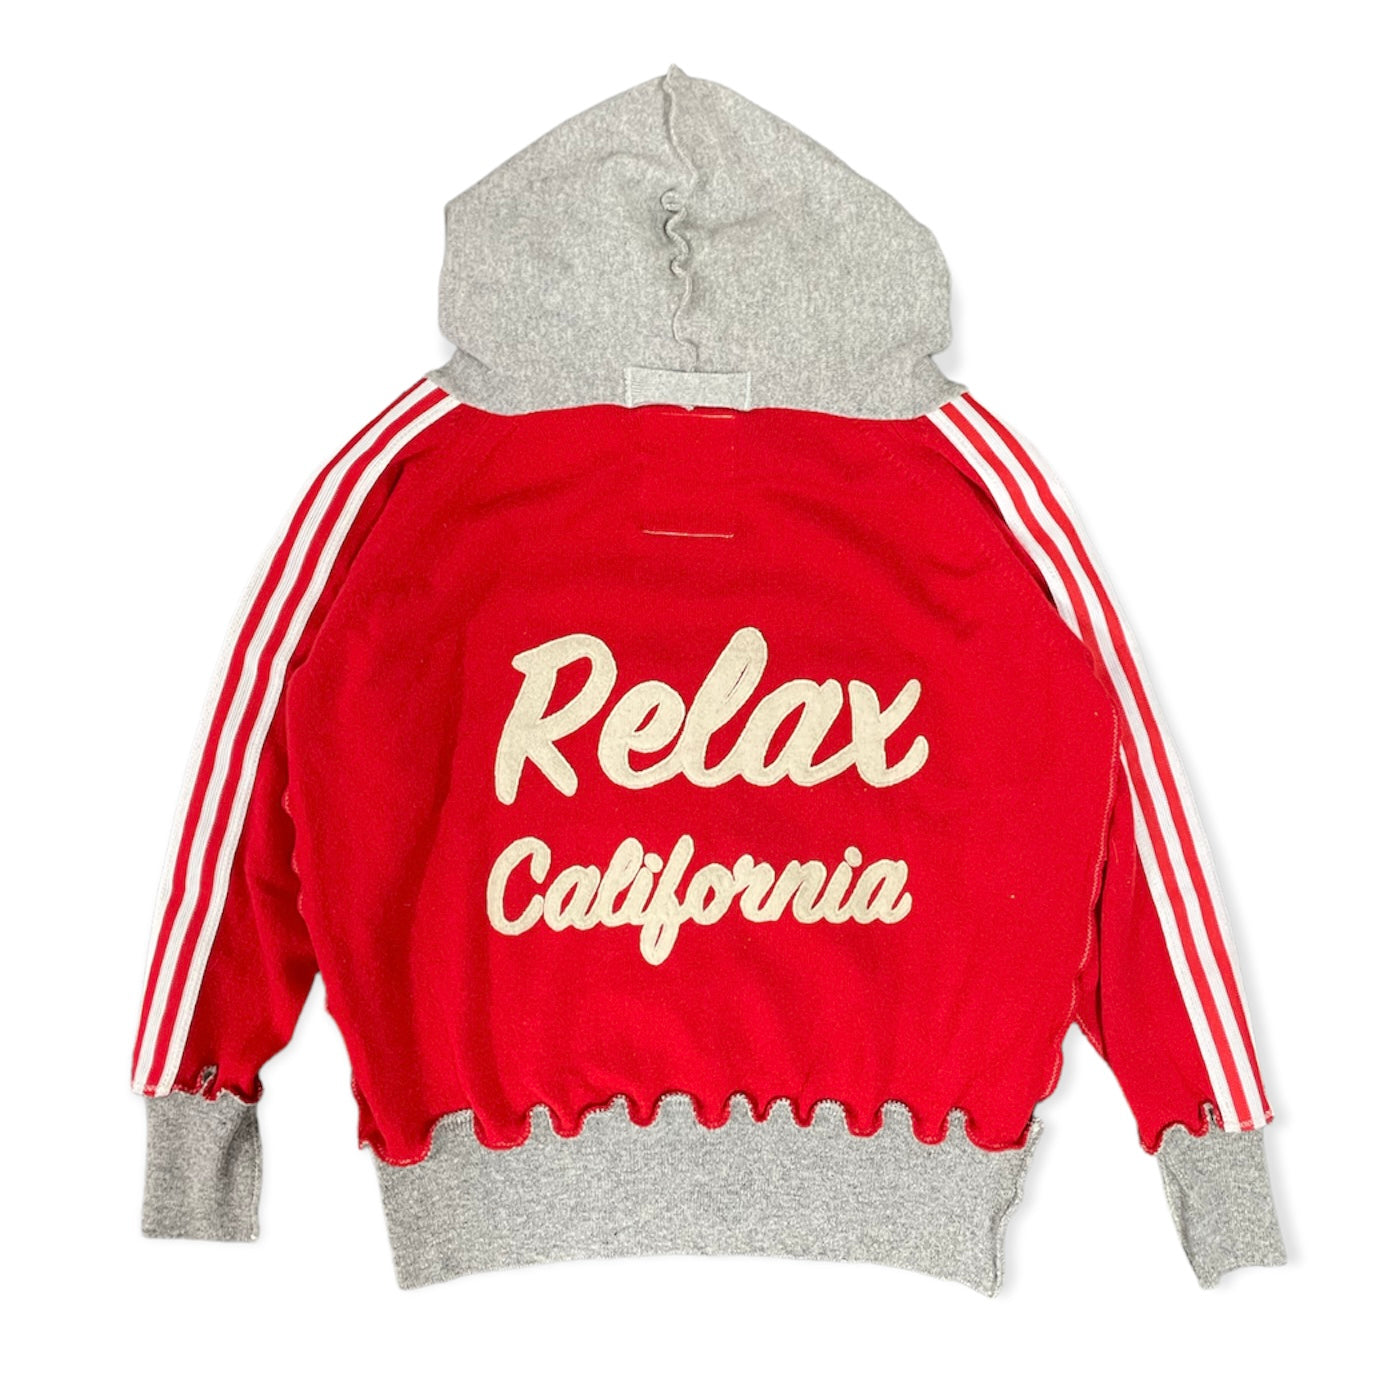 【A LOVE MOVEMENT】Cashmere Hoodie / Red(ア ラブ ムーブメント カシミアフーディー/レッド)